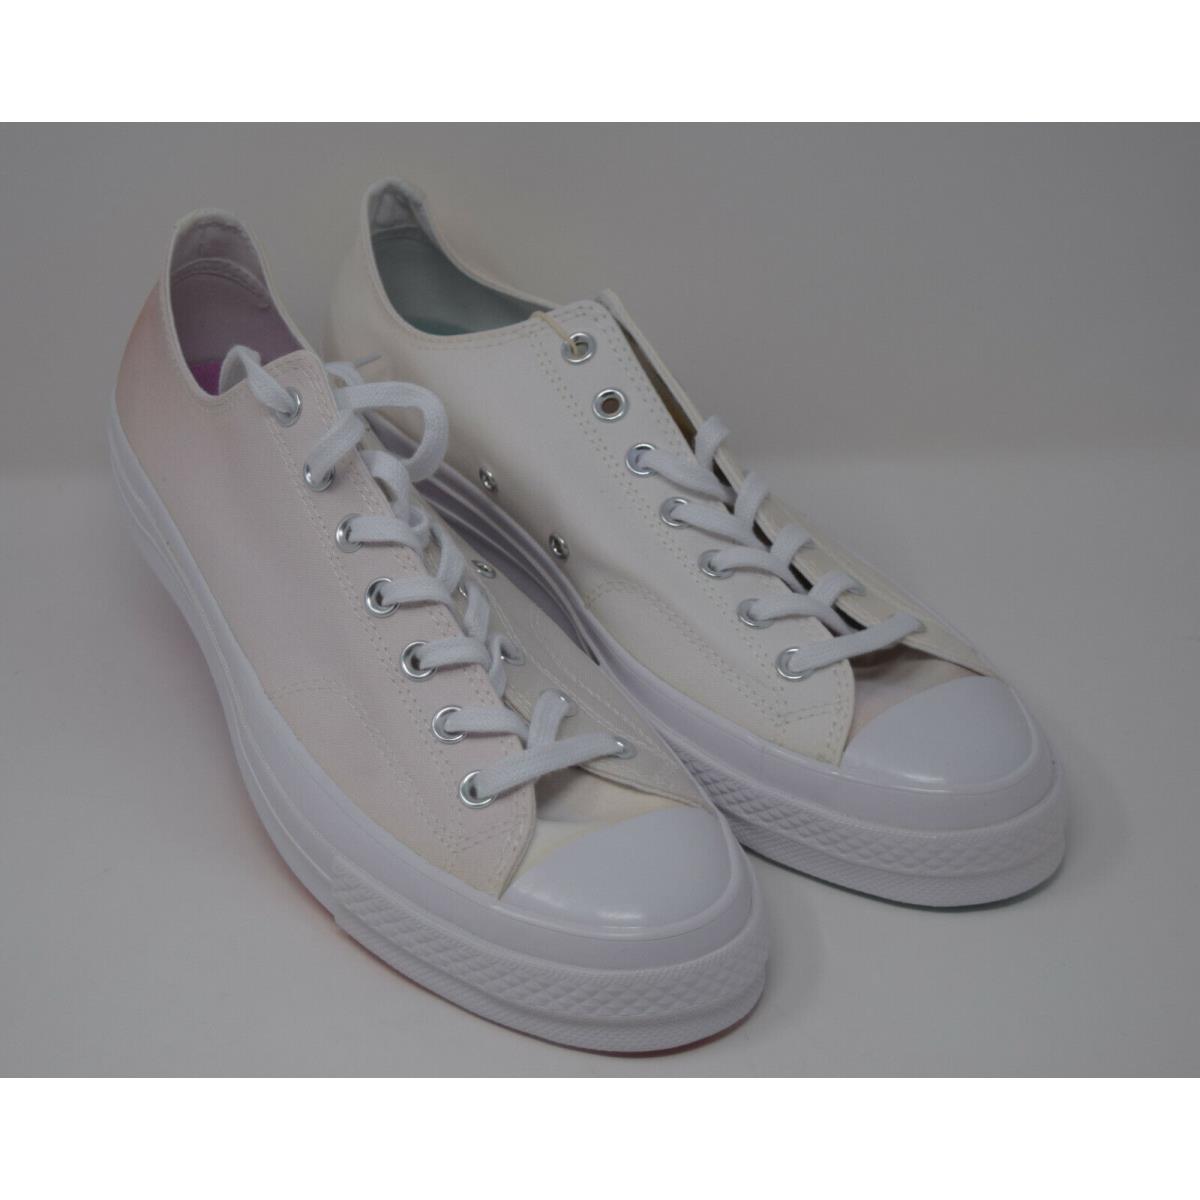 Converse Chuck 70 Ox 166599C White Shoes Sneakers 12 US